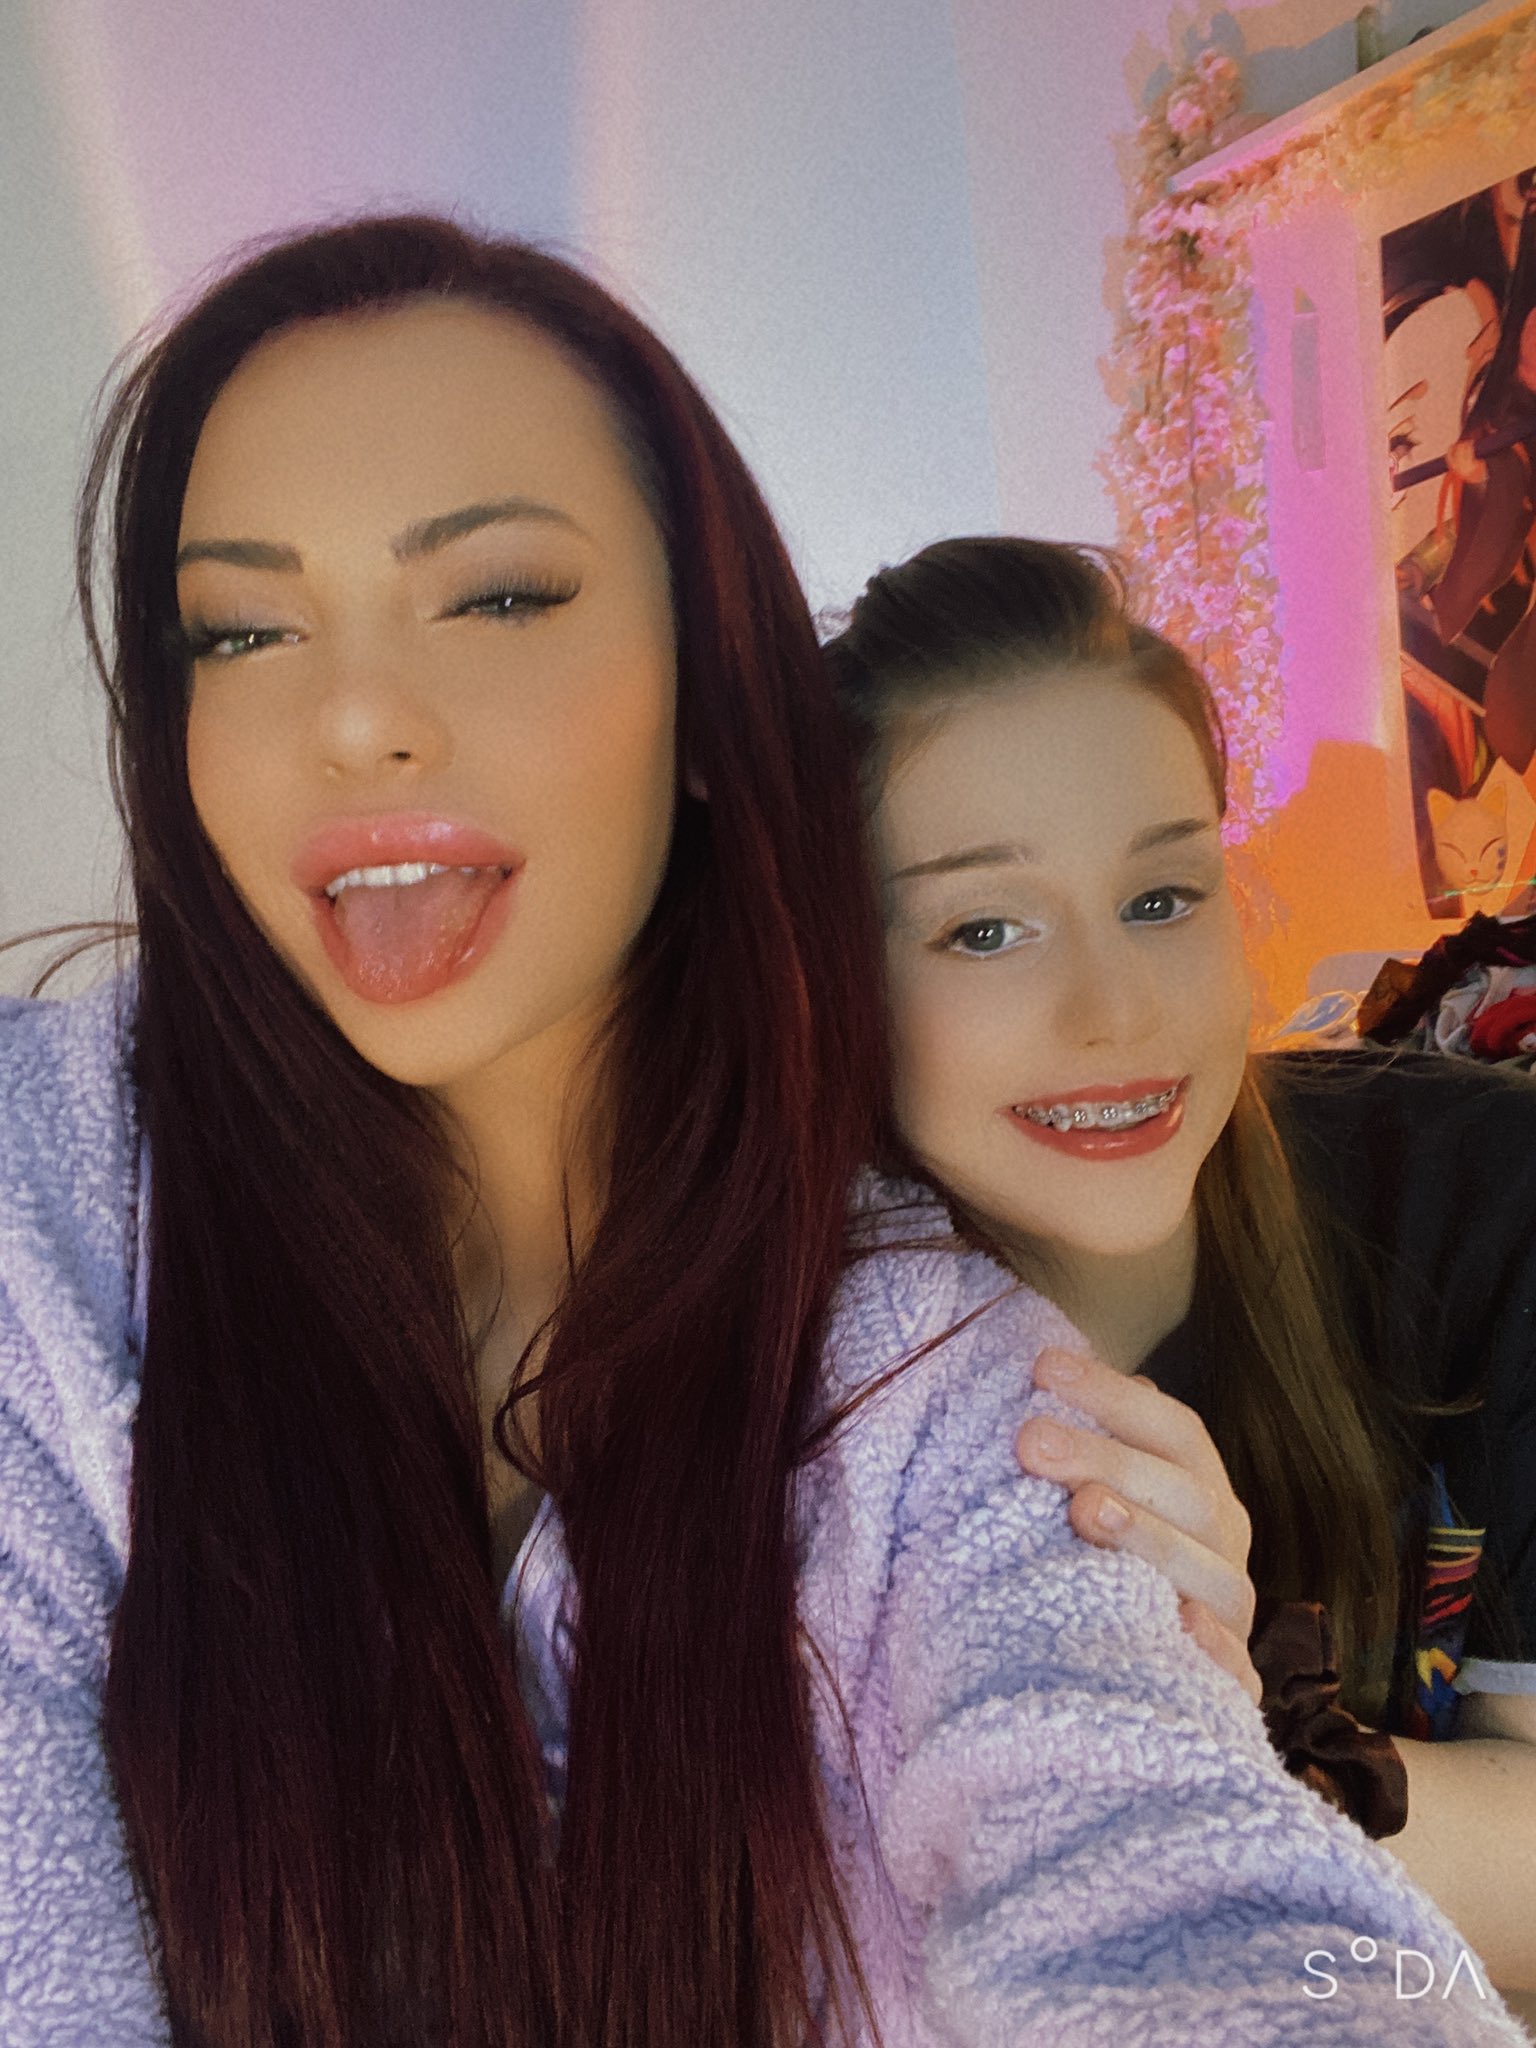 Tw Pornstars Sabina Twitter Me And My Girlfriend Mabelmay1 Are Taking Video Calls 9 11 Pm